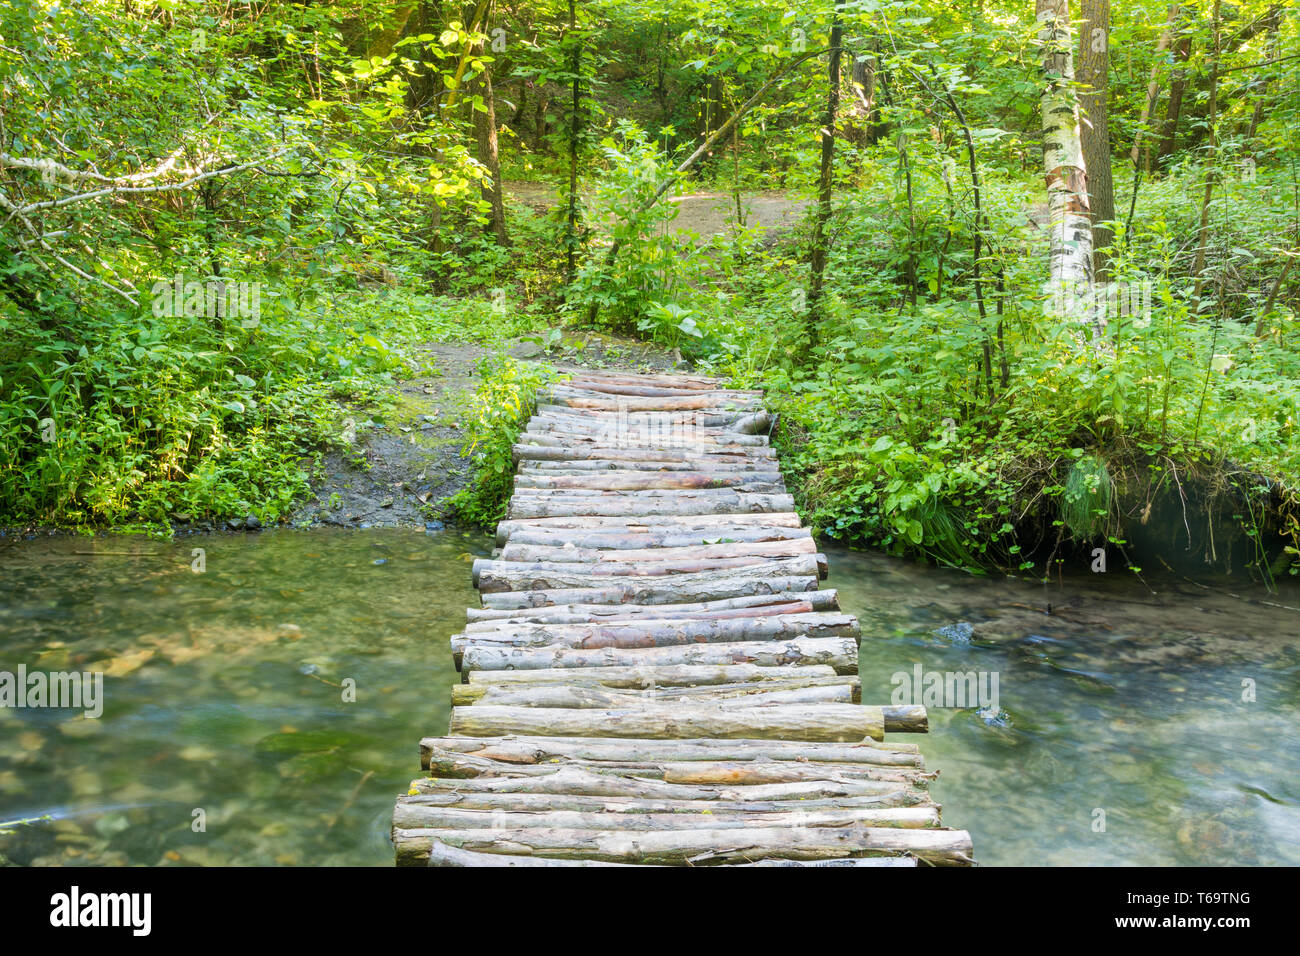 Homemade wooden bridge over a small river forest Stock Photo